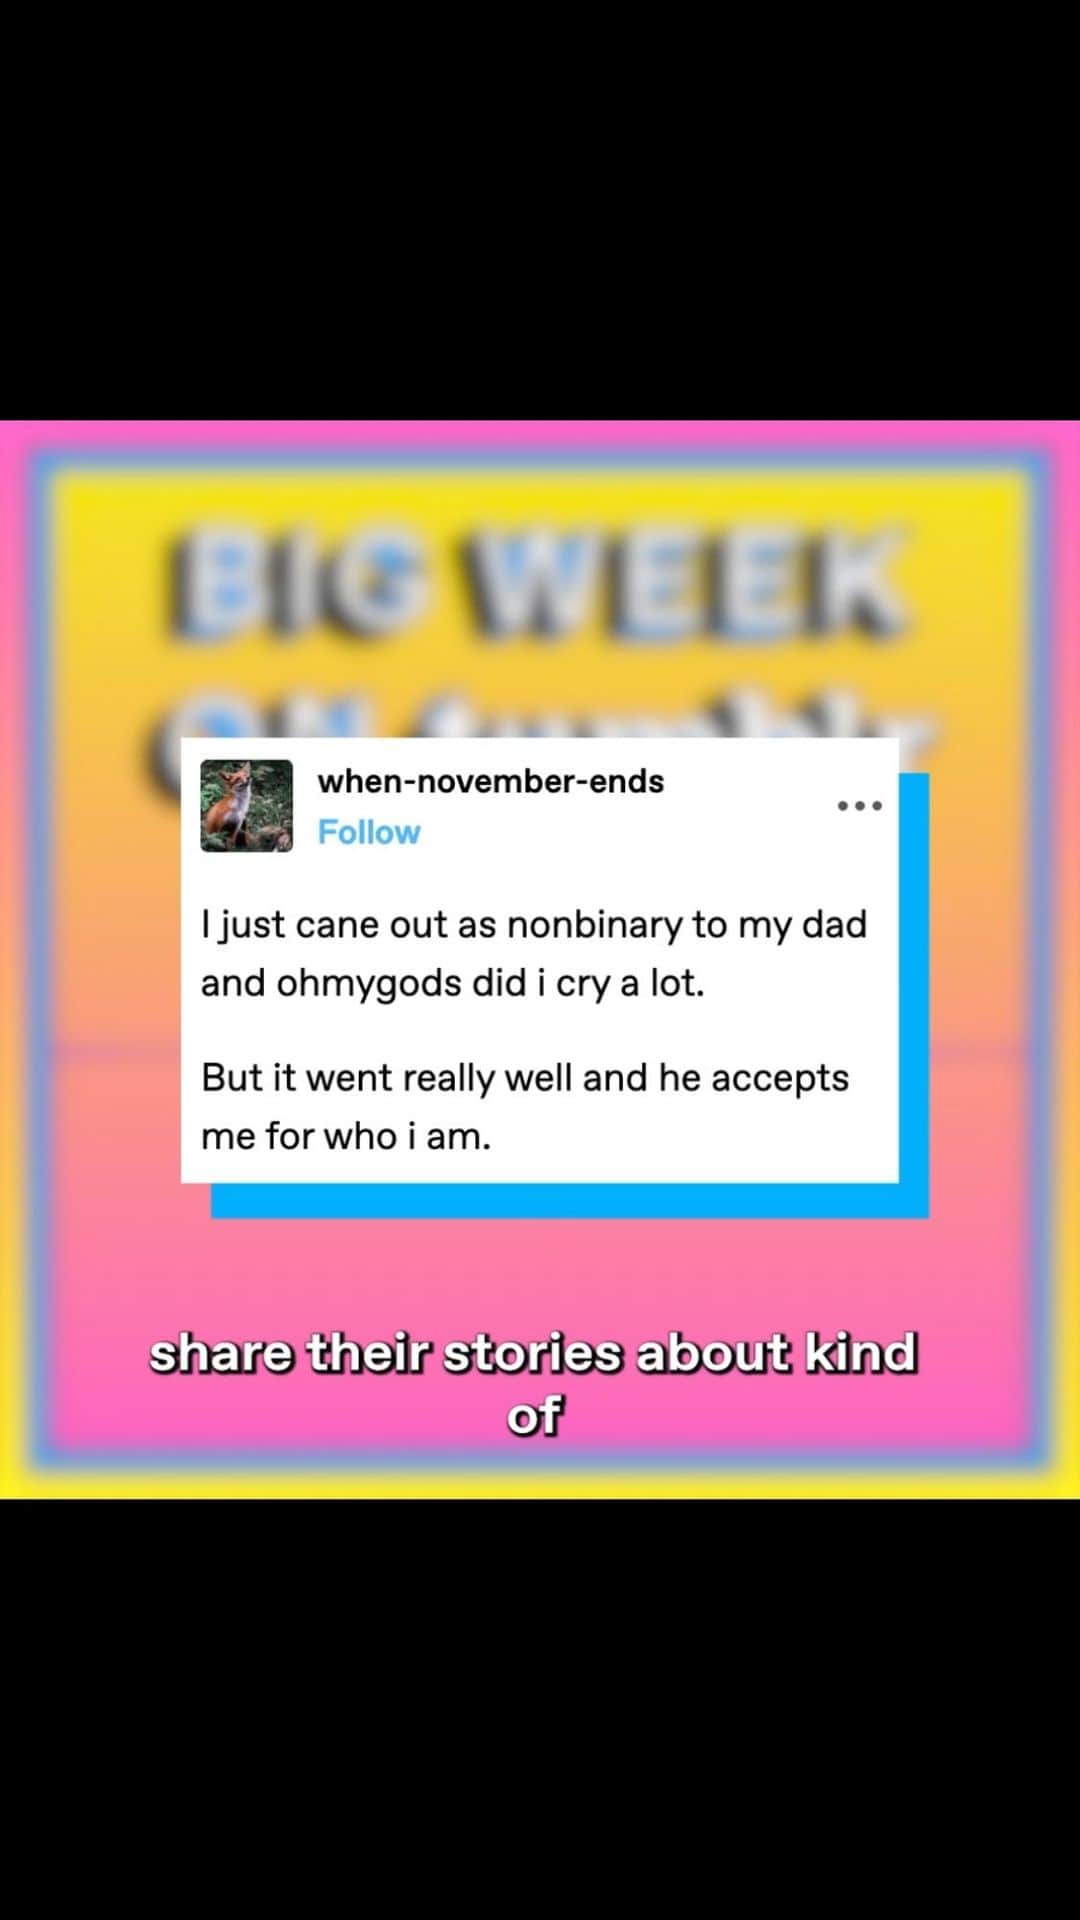 Tumblrのインスタグラム：「✨ This week, in our trends section: Gravity Falls, Ms. Marvel, & Pride Month.  ✨ In our chat segment, host Cates Holderness talks to return guest Loll Junggeburth, about Pride on Tumblr!  ✨ Start listening at BigWeekOn.tumblr.com」